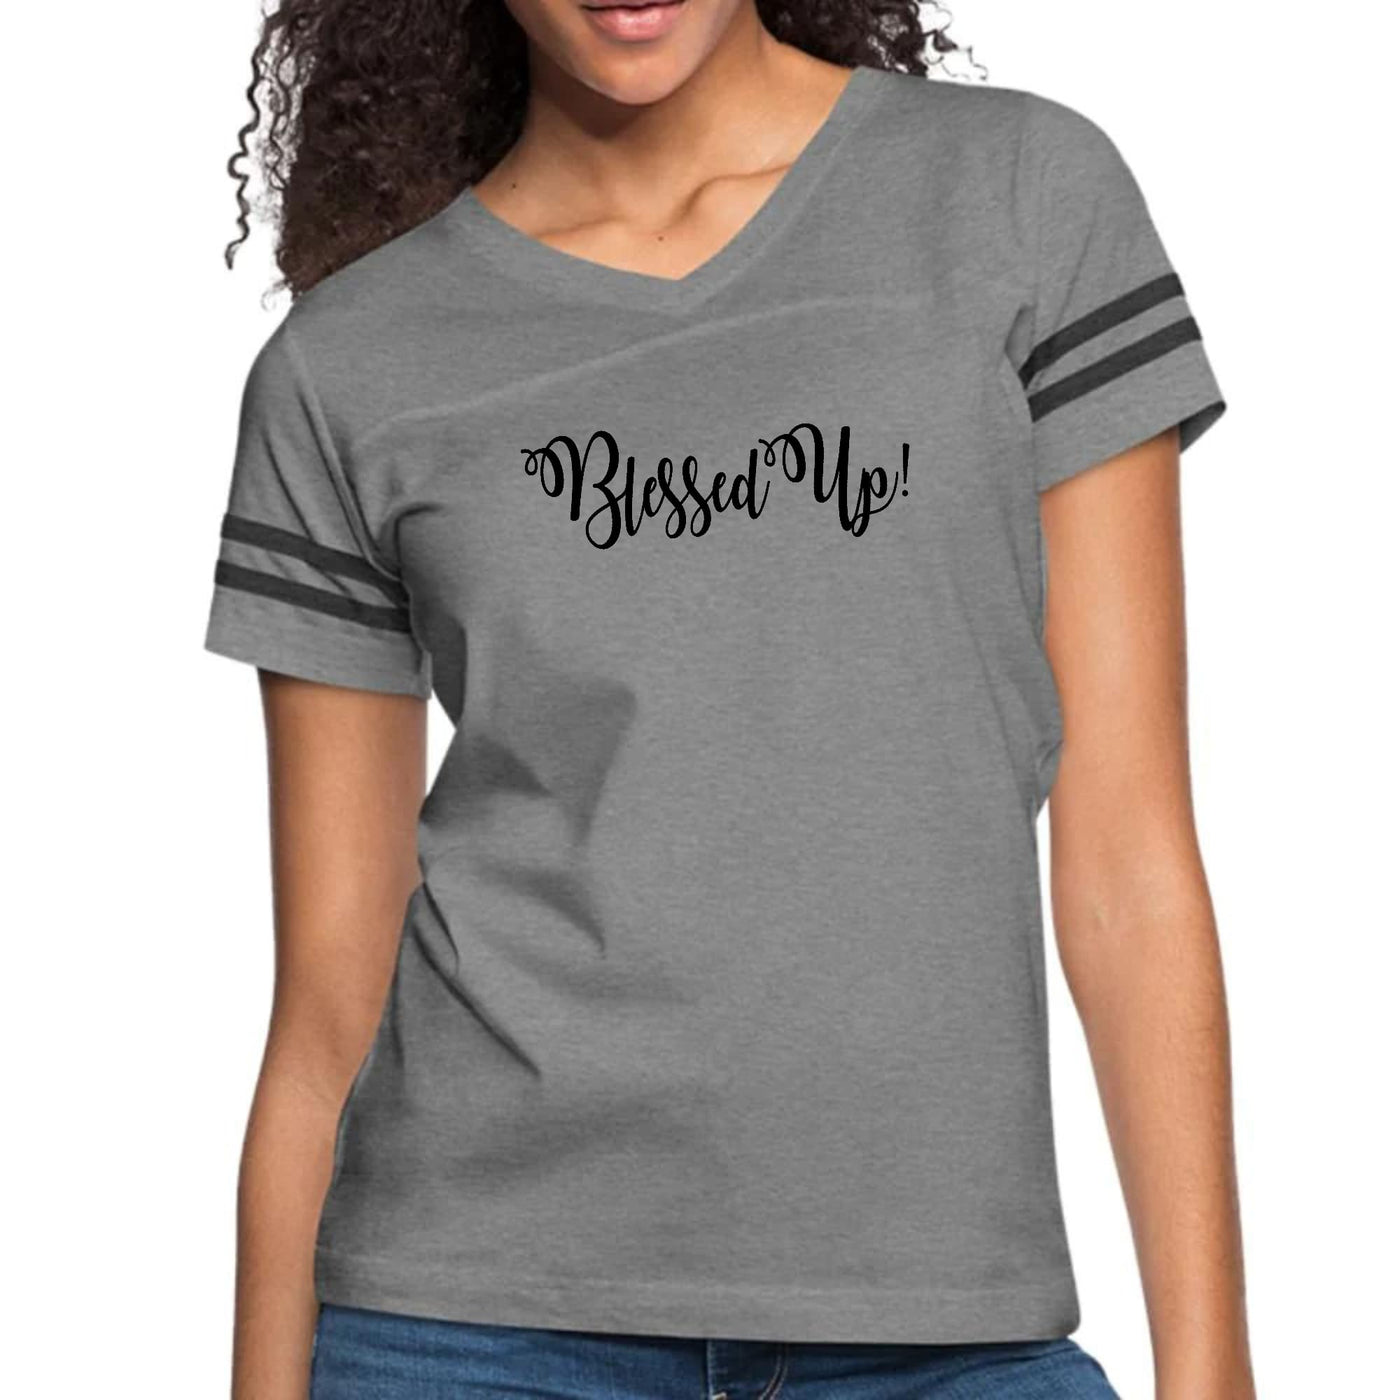 Womens Vintage Sport Graphic T-Shirt Blessed Up Quote Black - Womens | T-Shirts